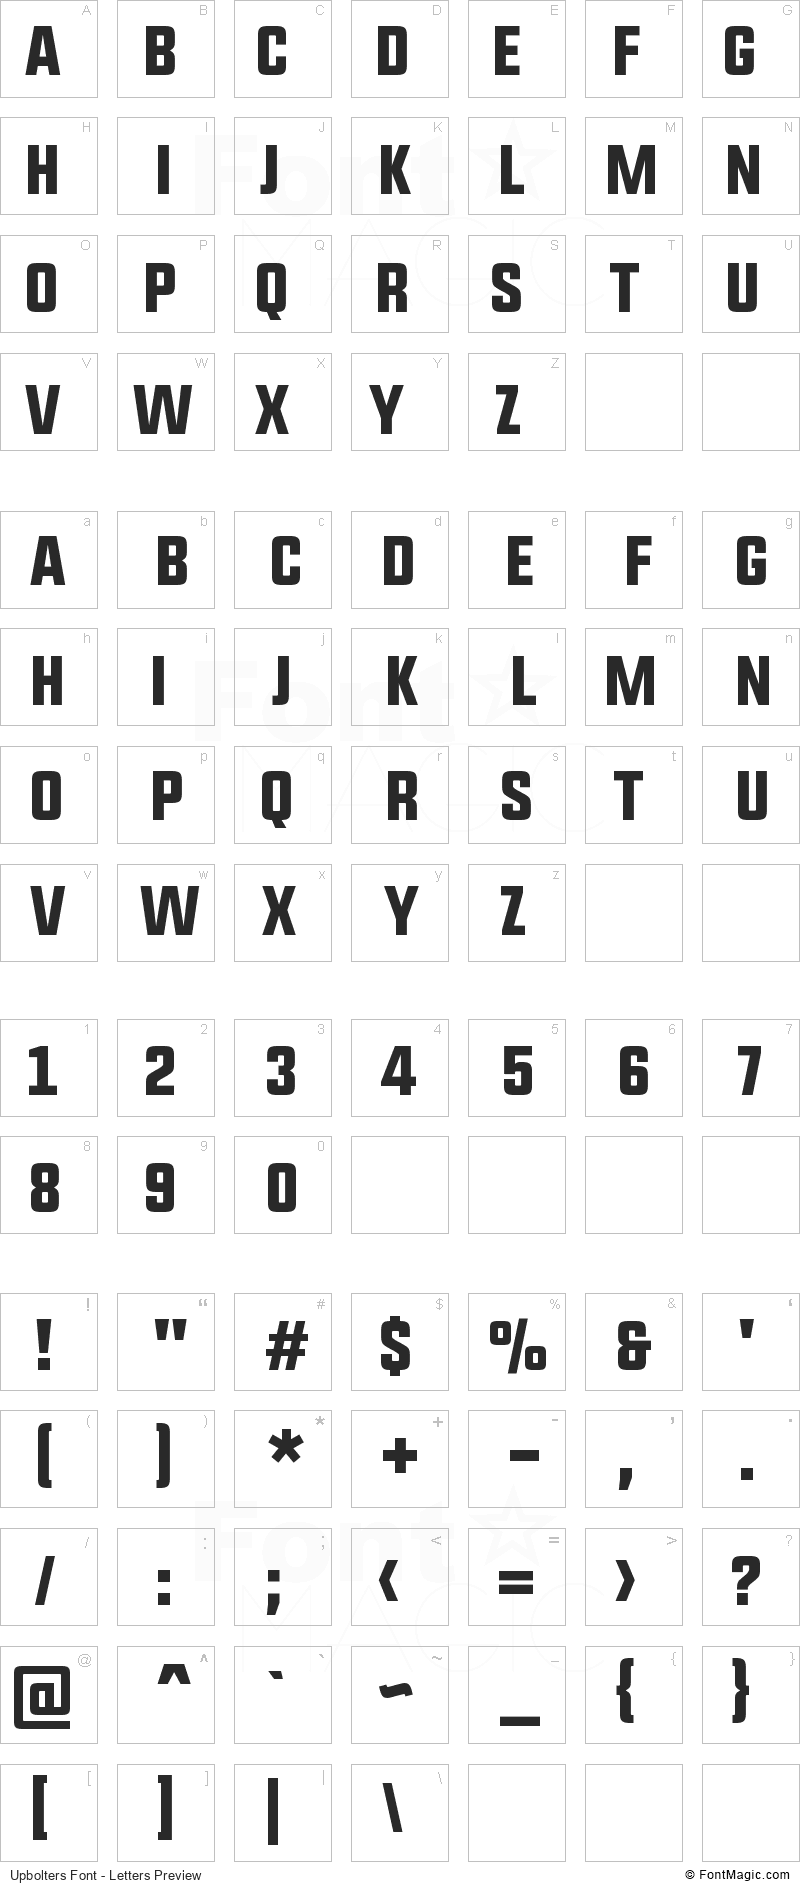 Upbolters Font - All Latters Preview Chart